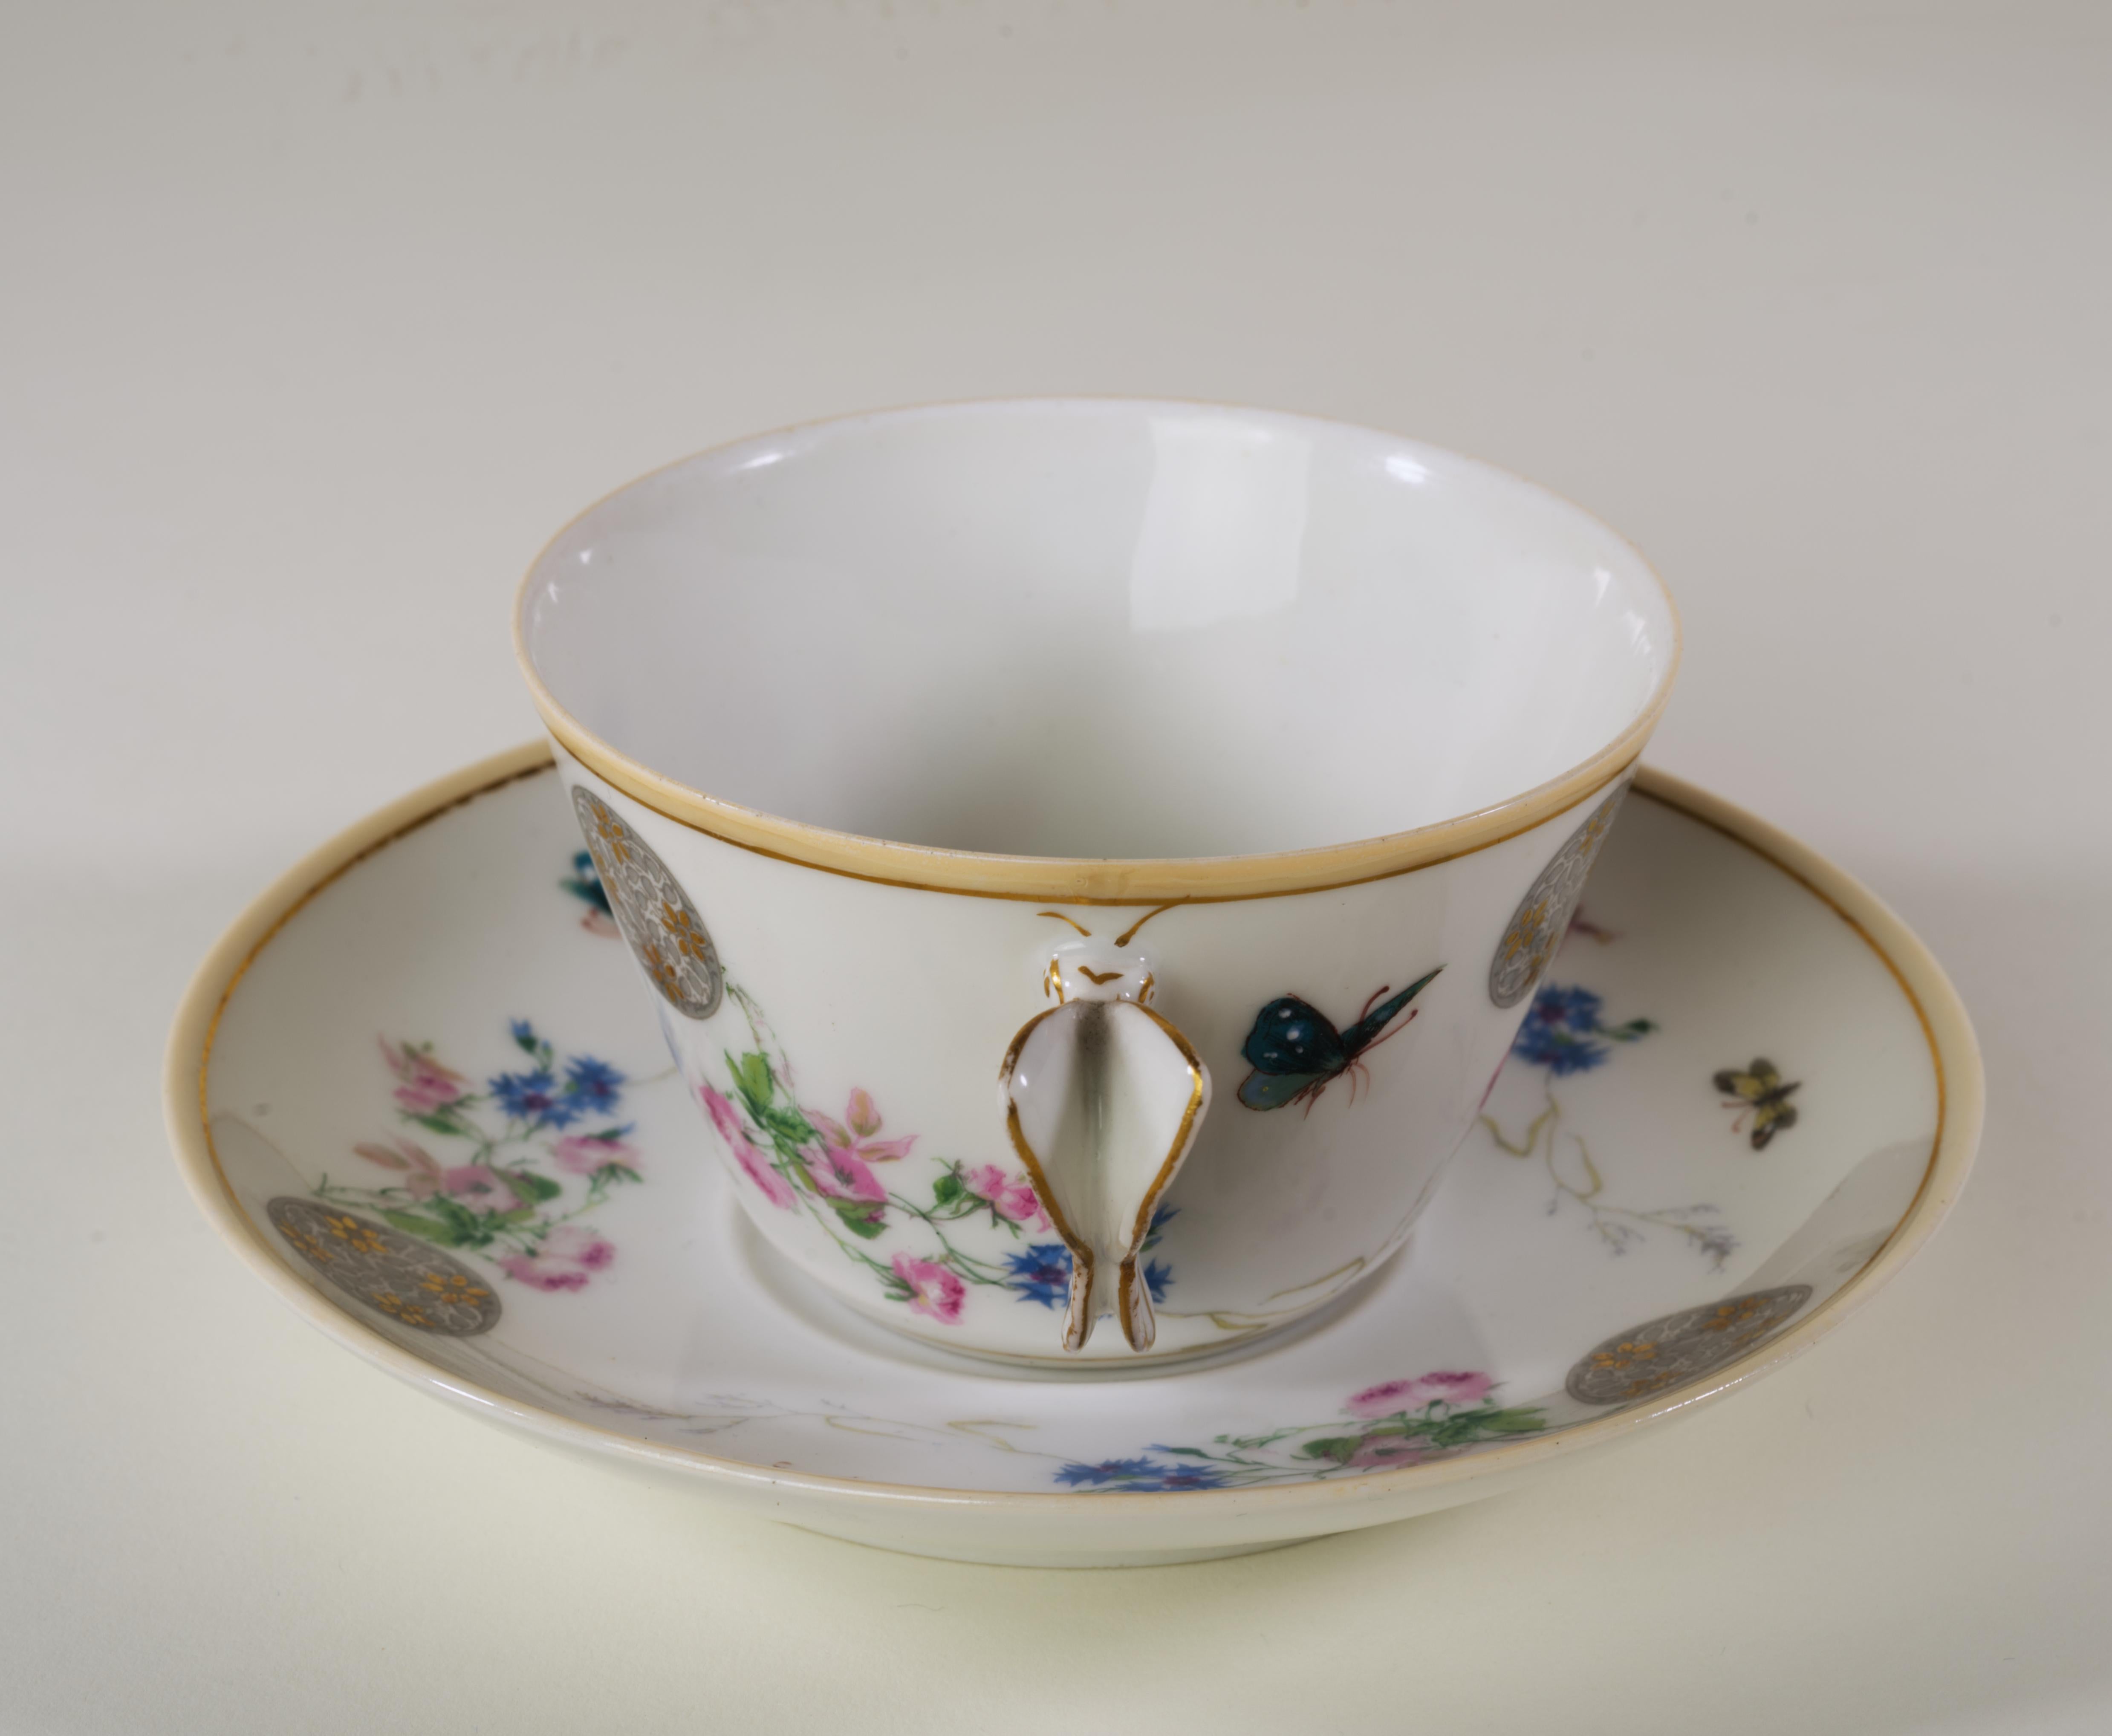 Haviland Limoges Butterfly Handled Cup and saucer set, 1879-1889, Aesthetic  For Sale 1